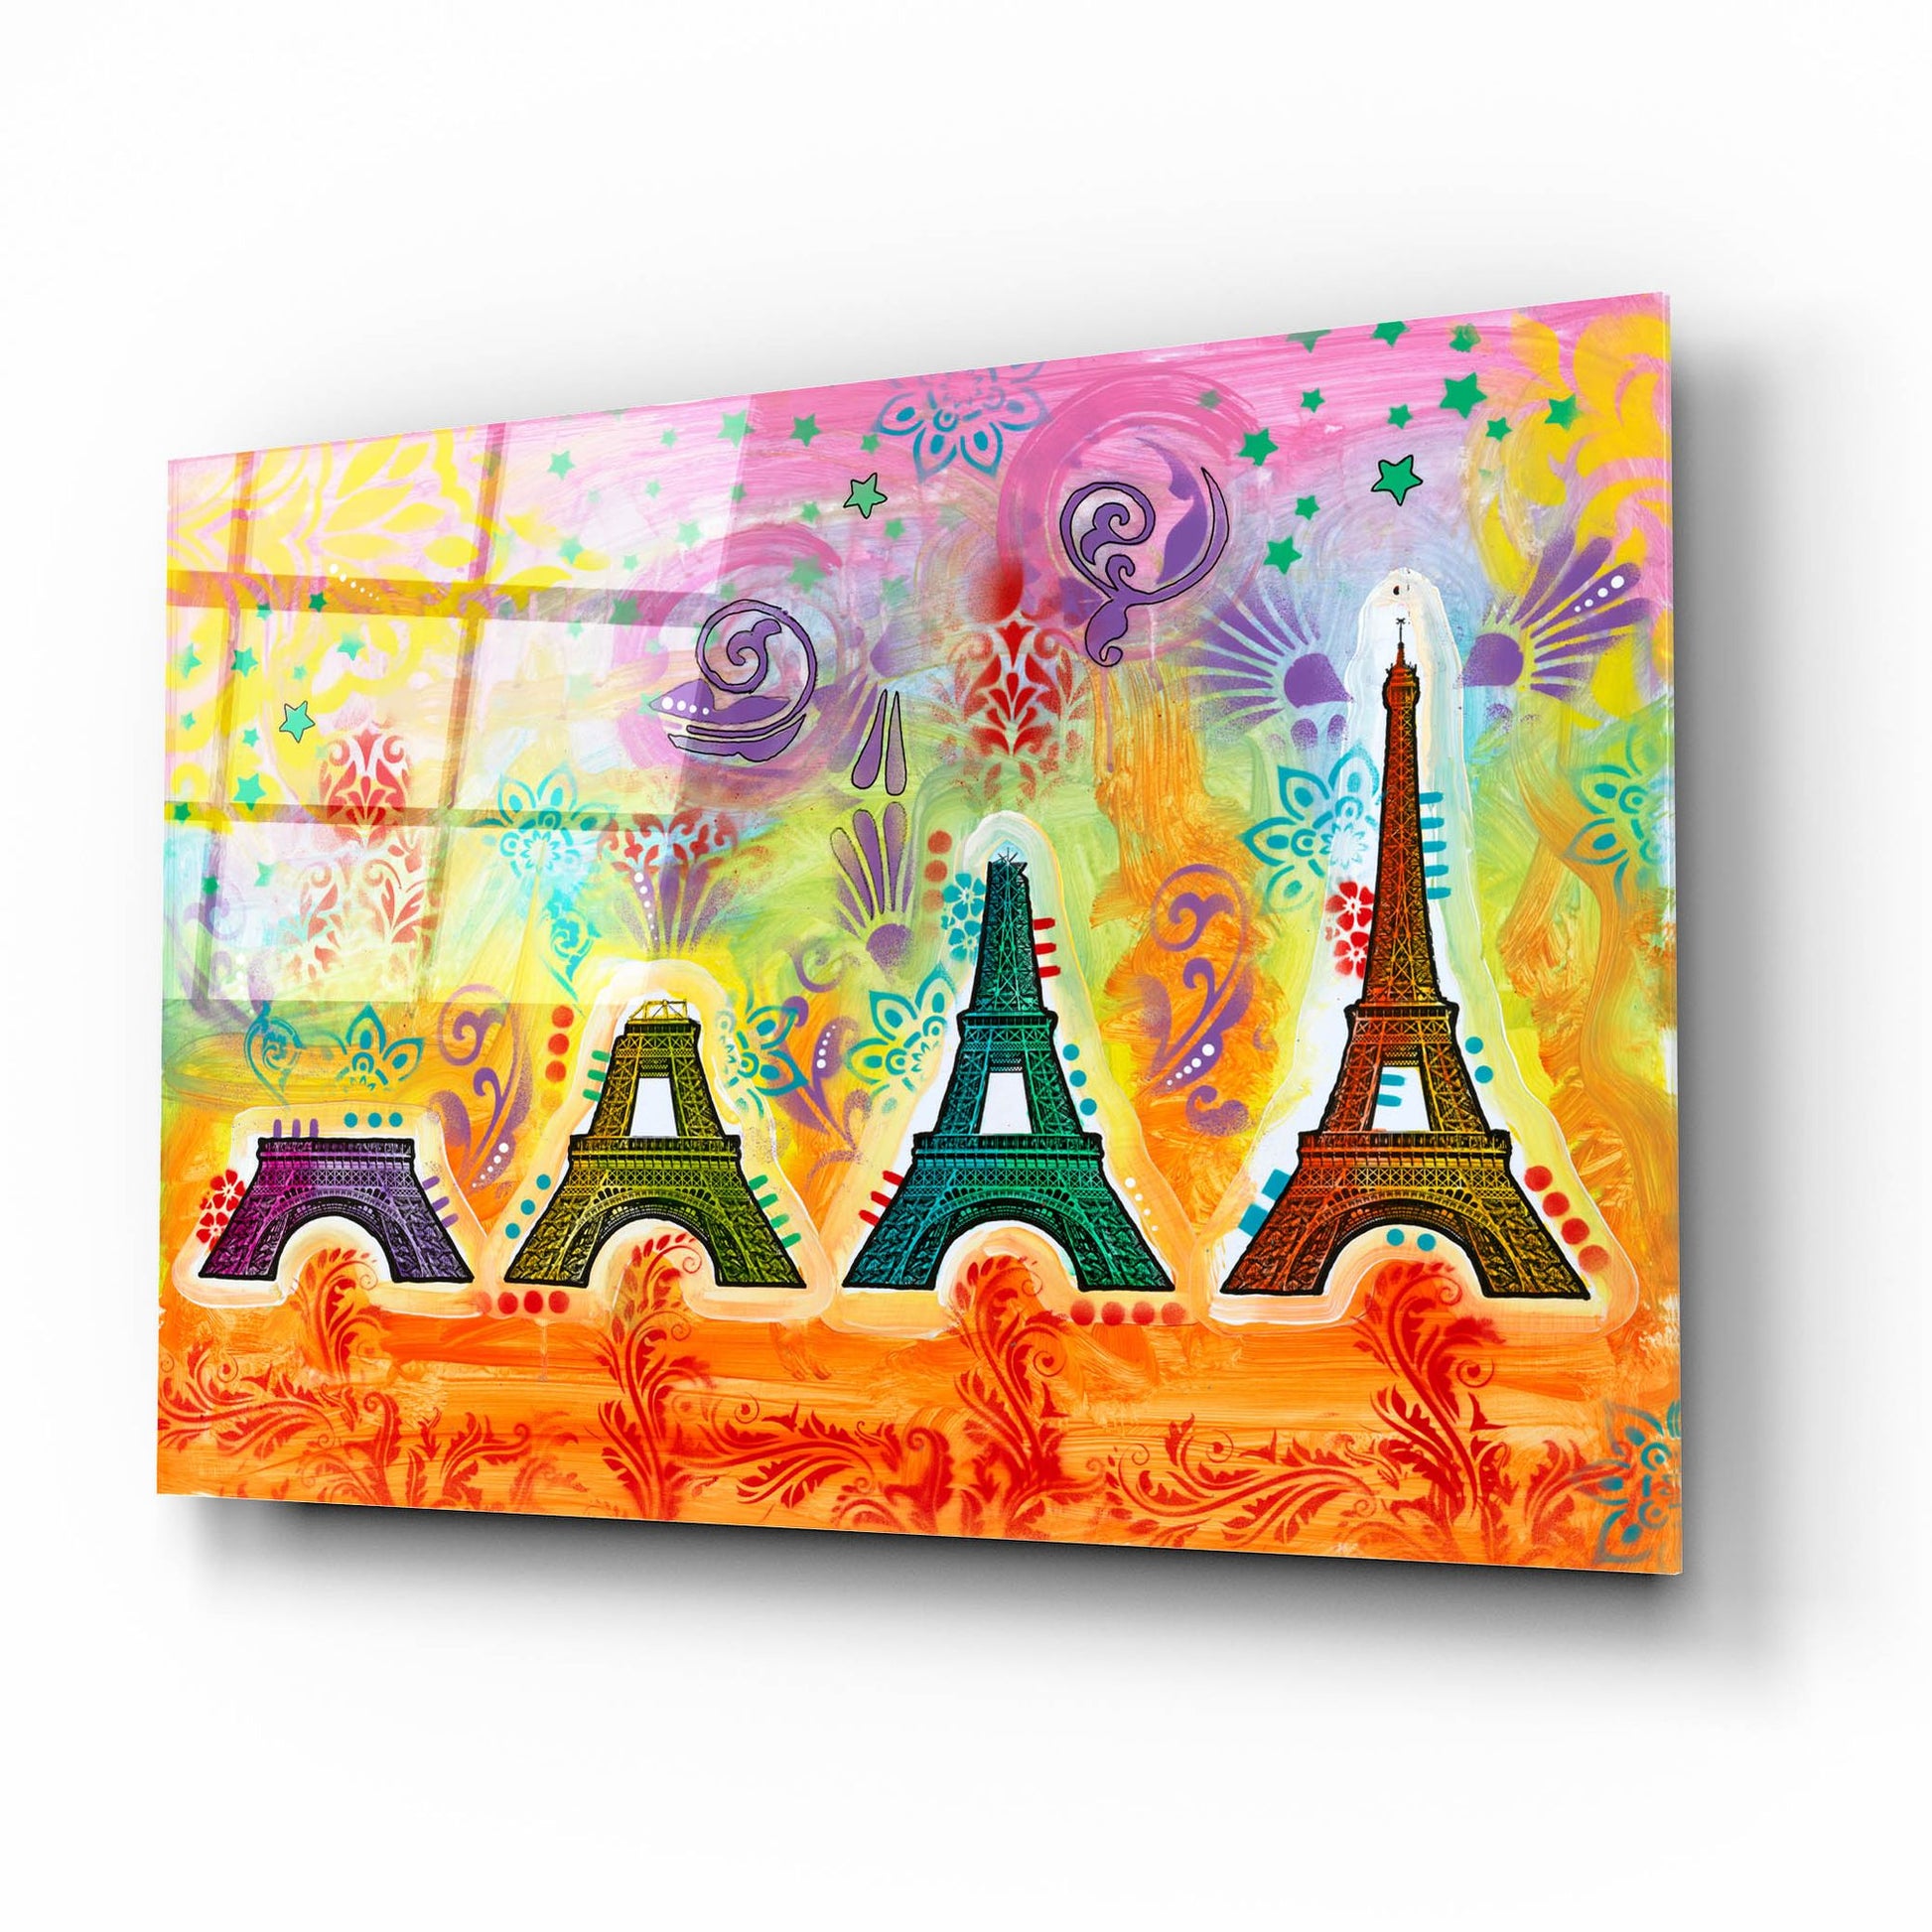 Epic Art 'Construction of the Eiffel Tower' by Dean Russo, Acrylic Glass Wall Art,16x12